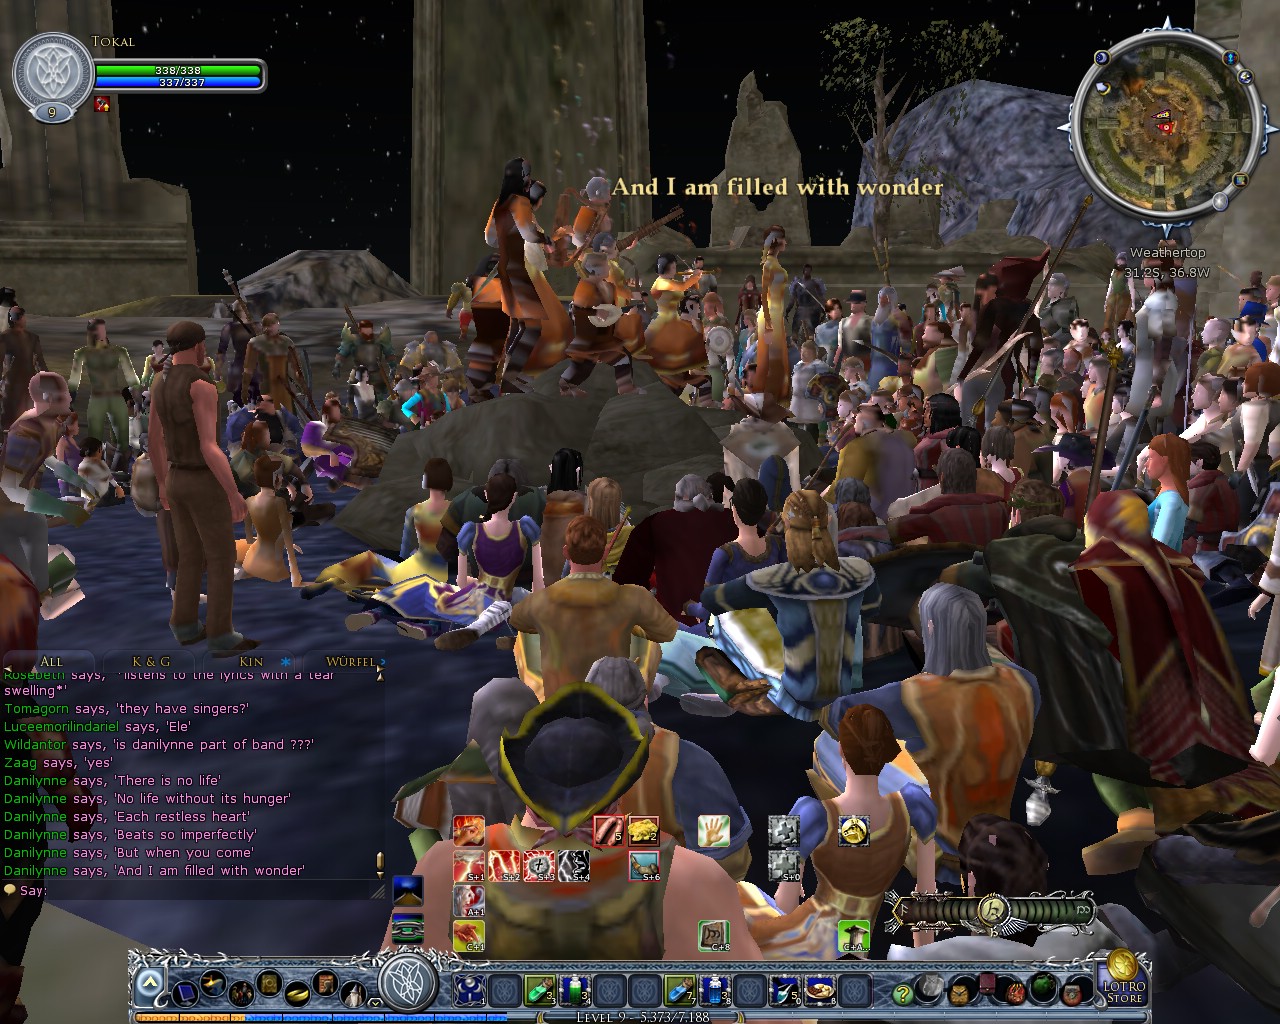 Image: The "Eriador Music Society" playing their tunes 02